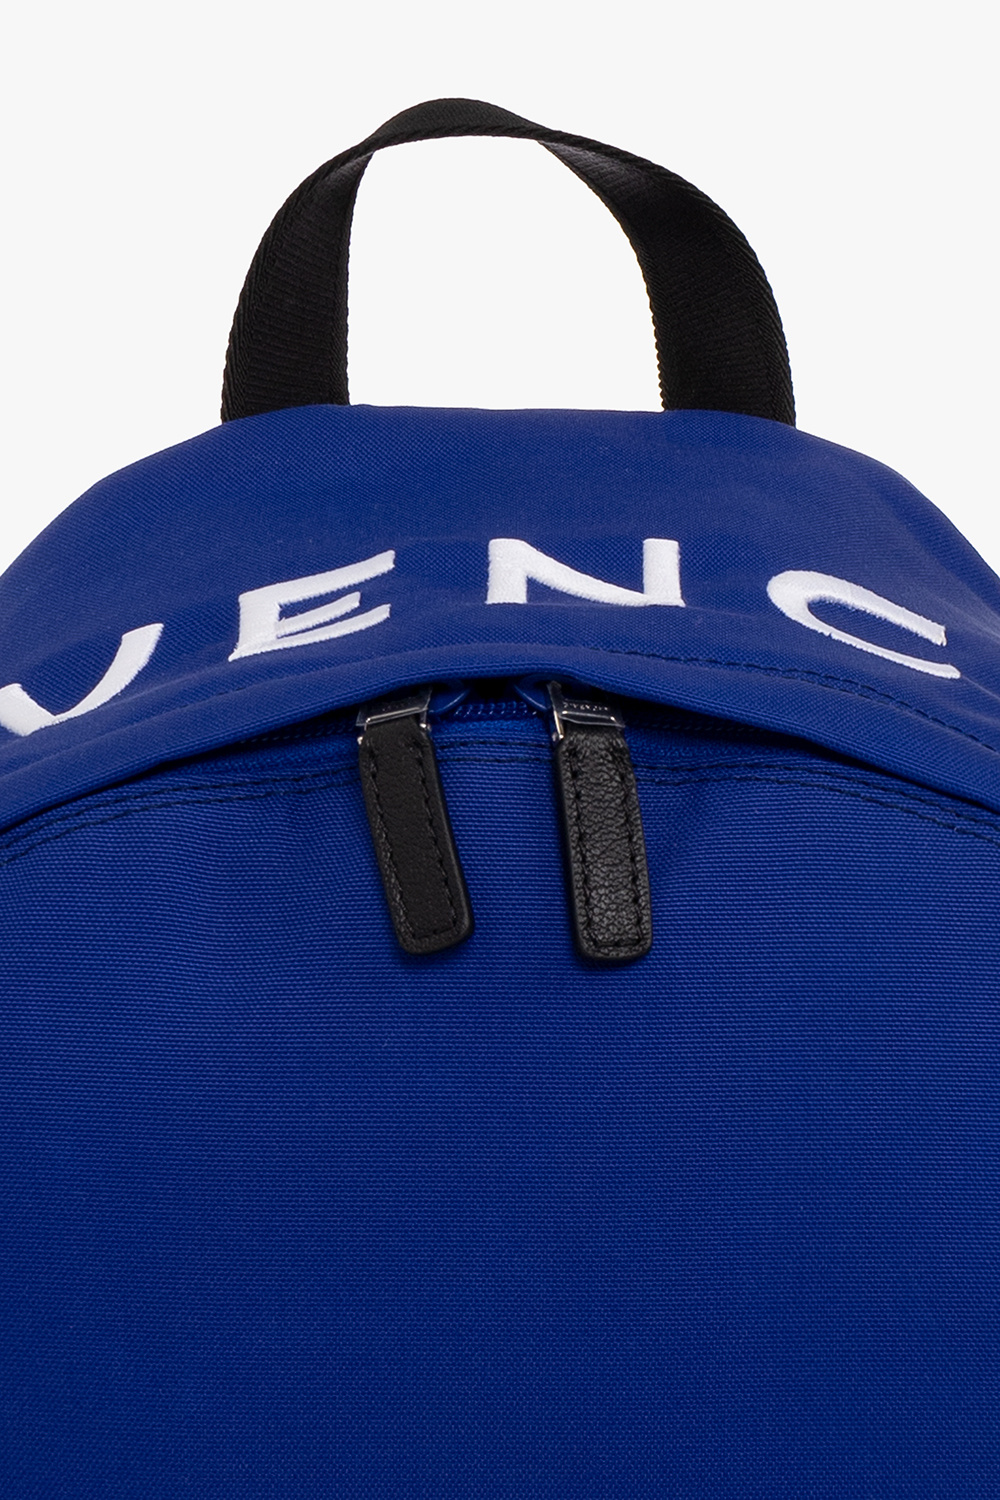 givenchy Disneys ‘Essential’ backpack